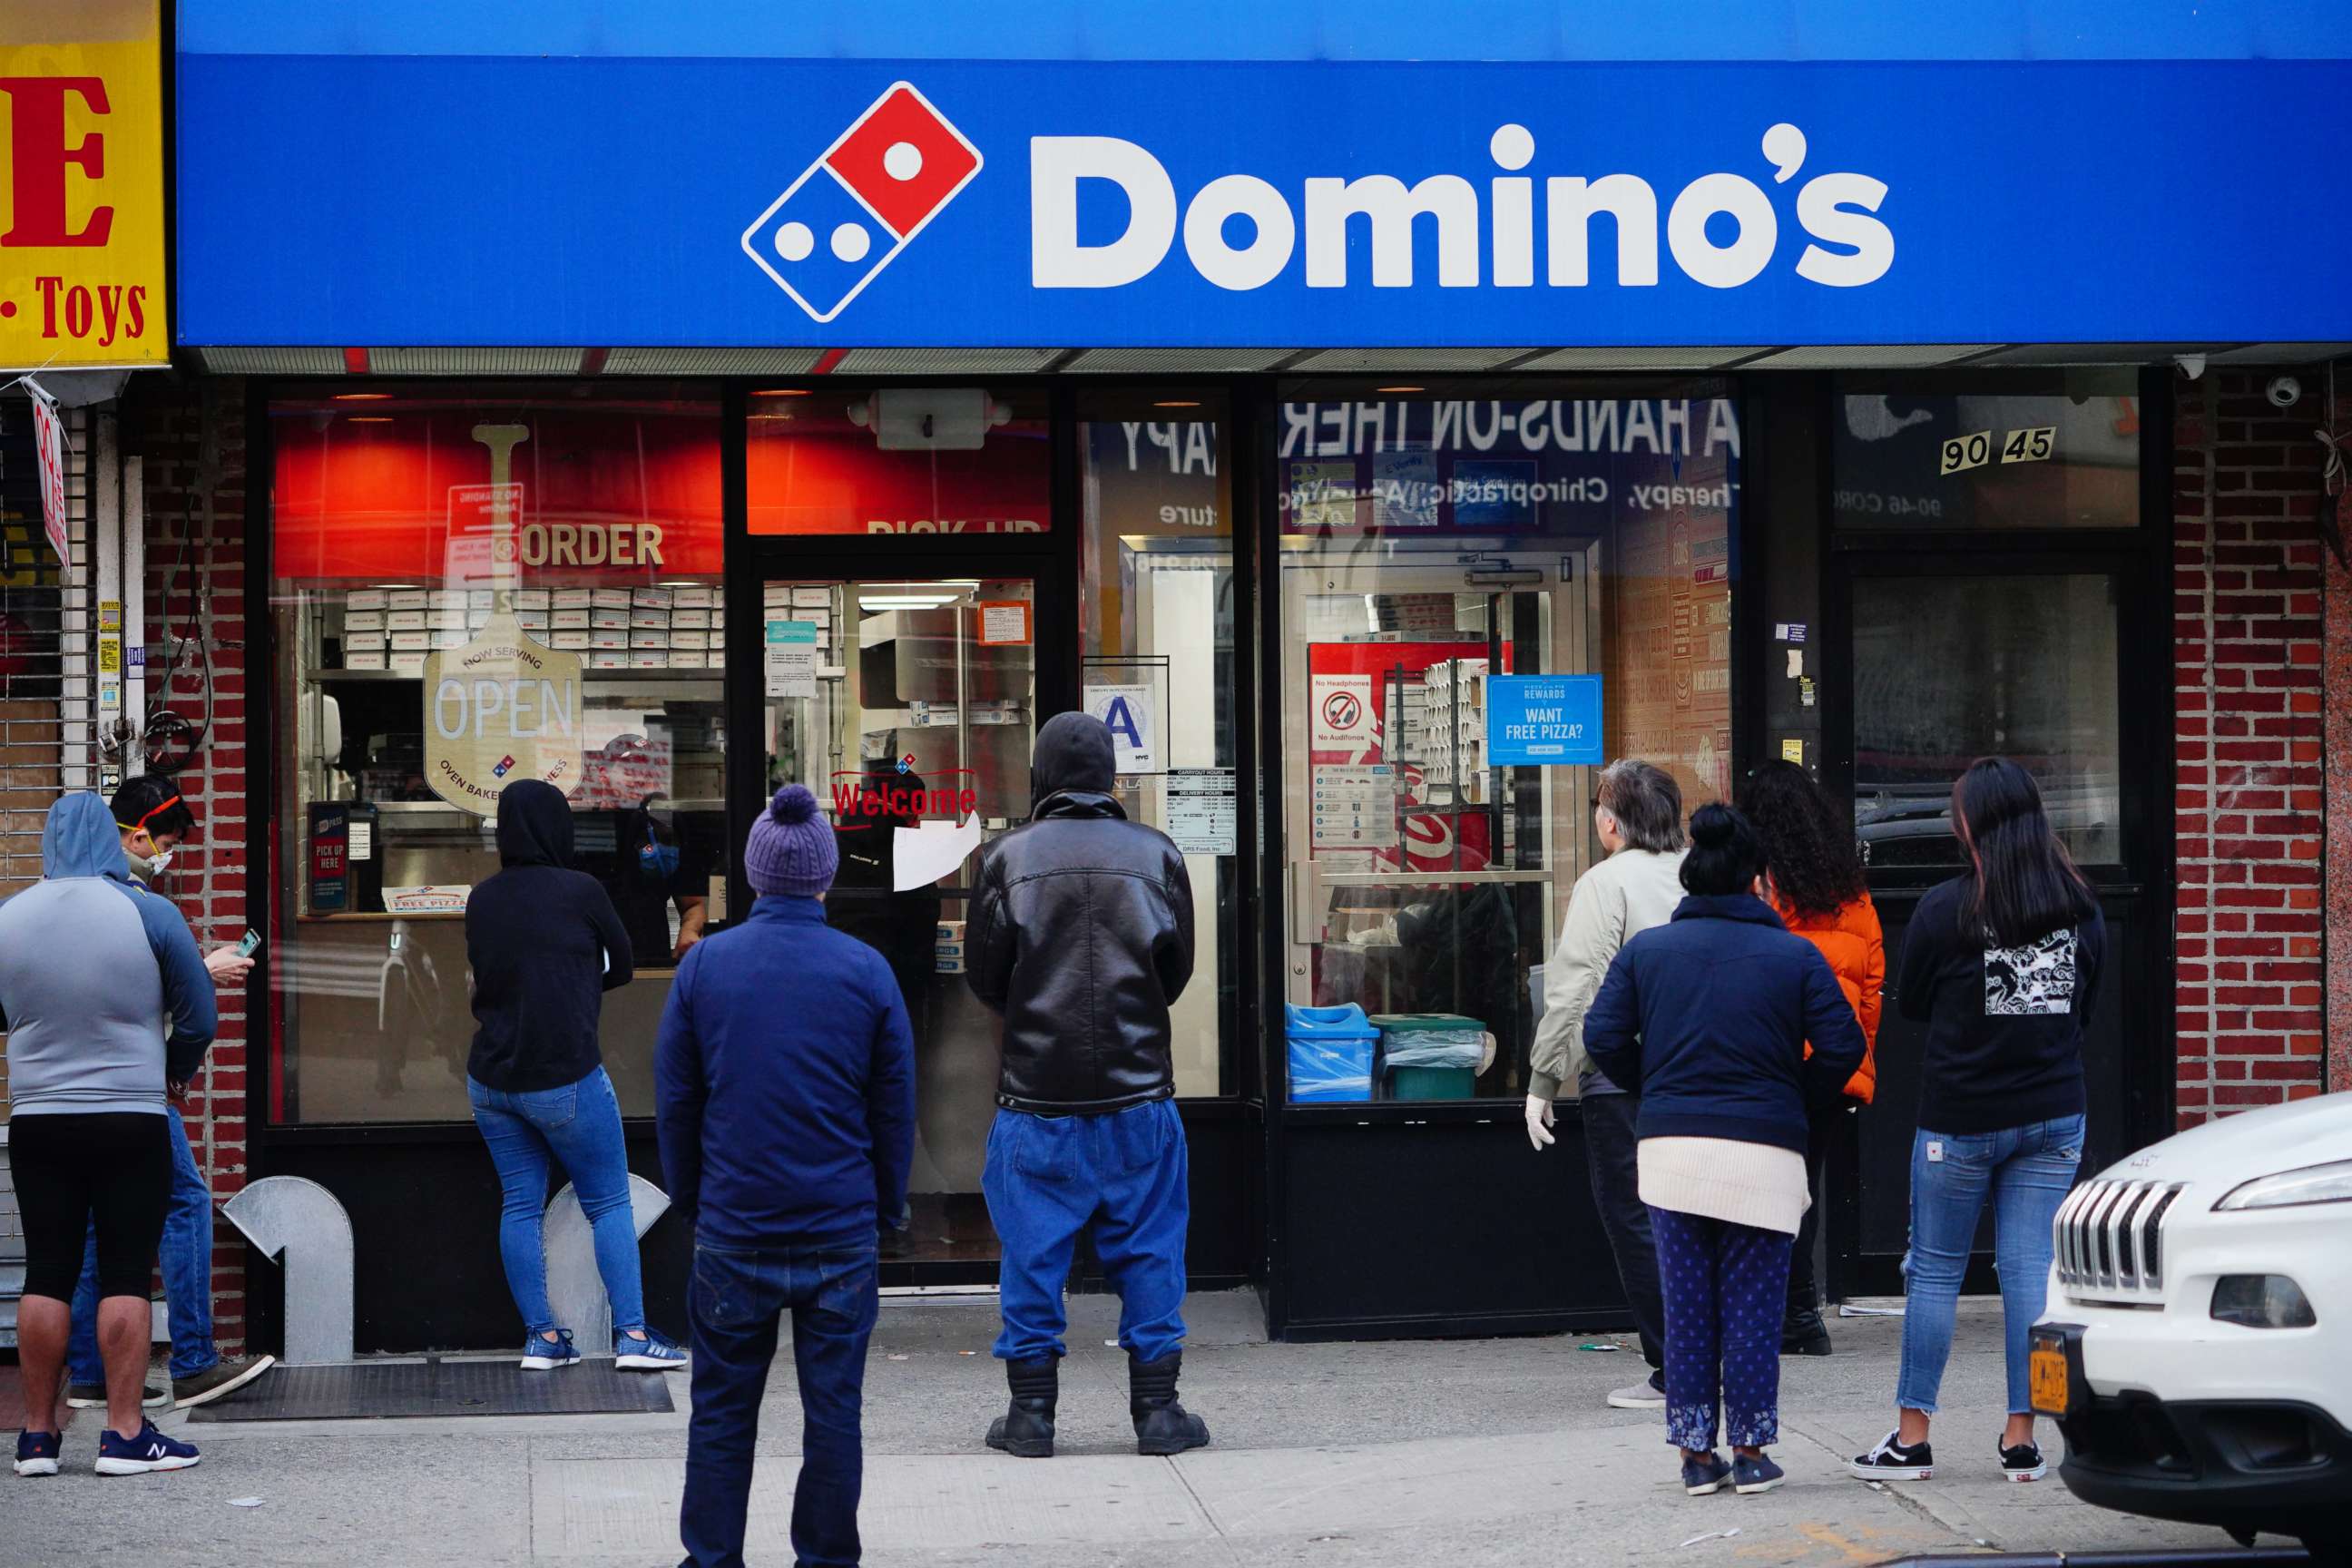 PHOTO: People stand in line outside of a pizza restaurant in Queens, New York, April 12, 2020.